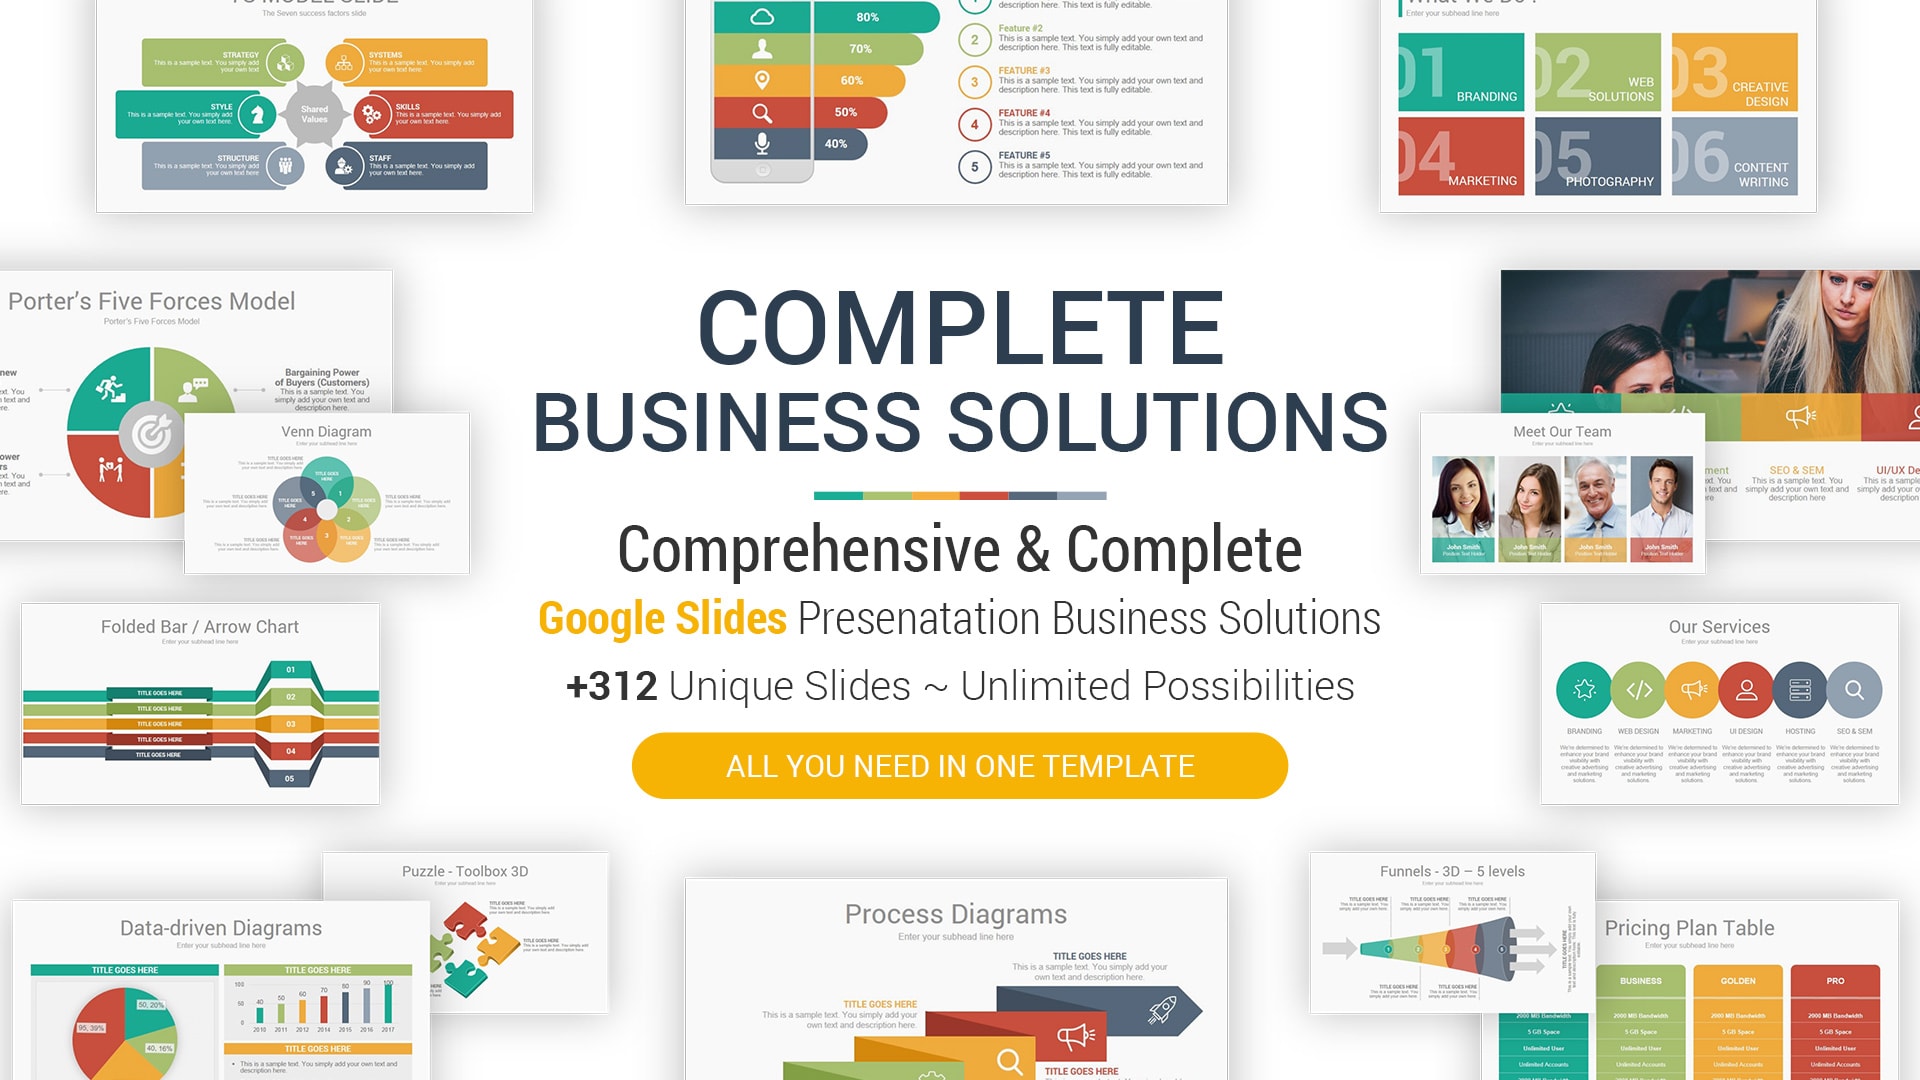 Complete Business Solutions Multipurpose Google Slides Presentation Template - High-Quality Google Slides Themes for Business Presentations